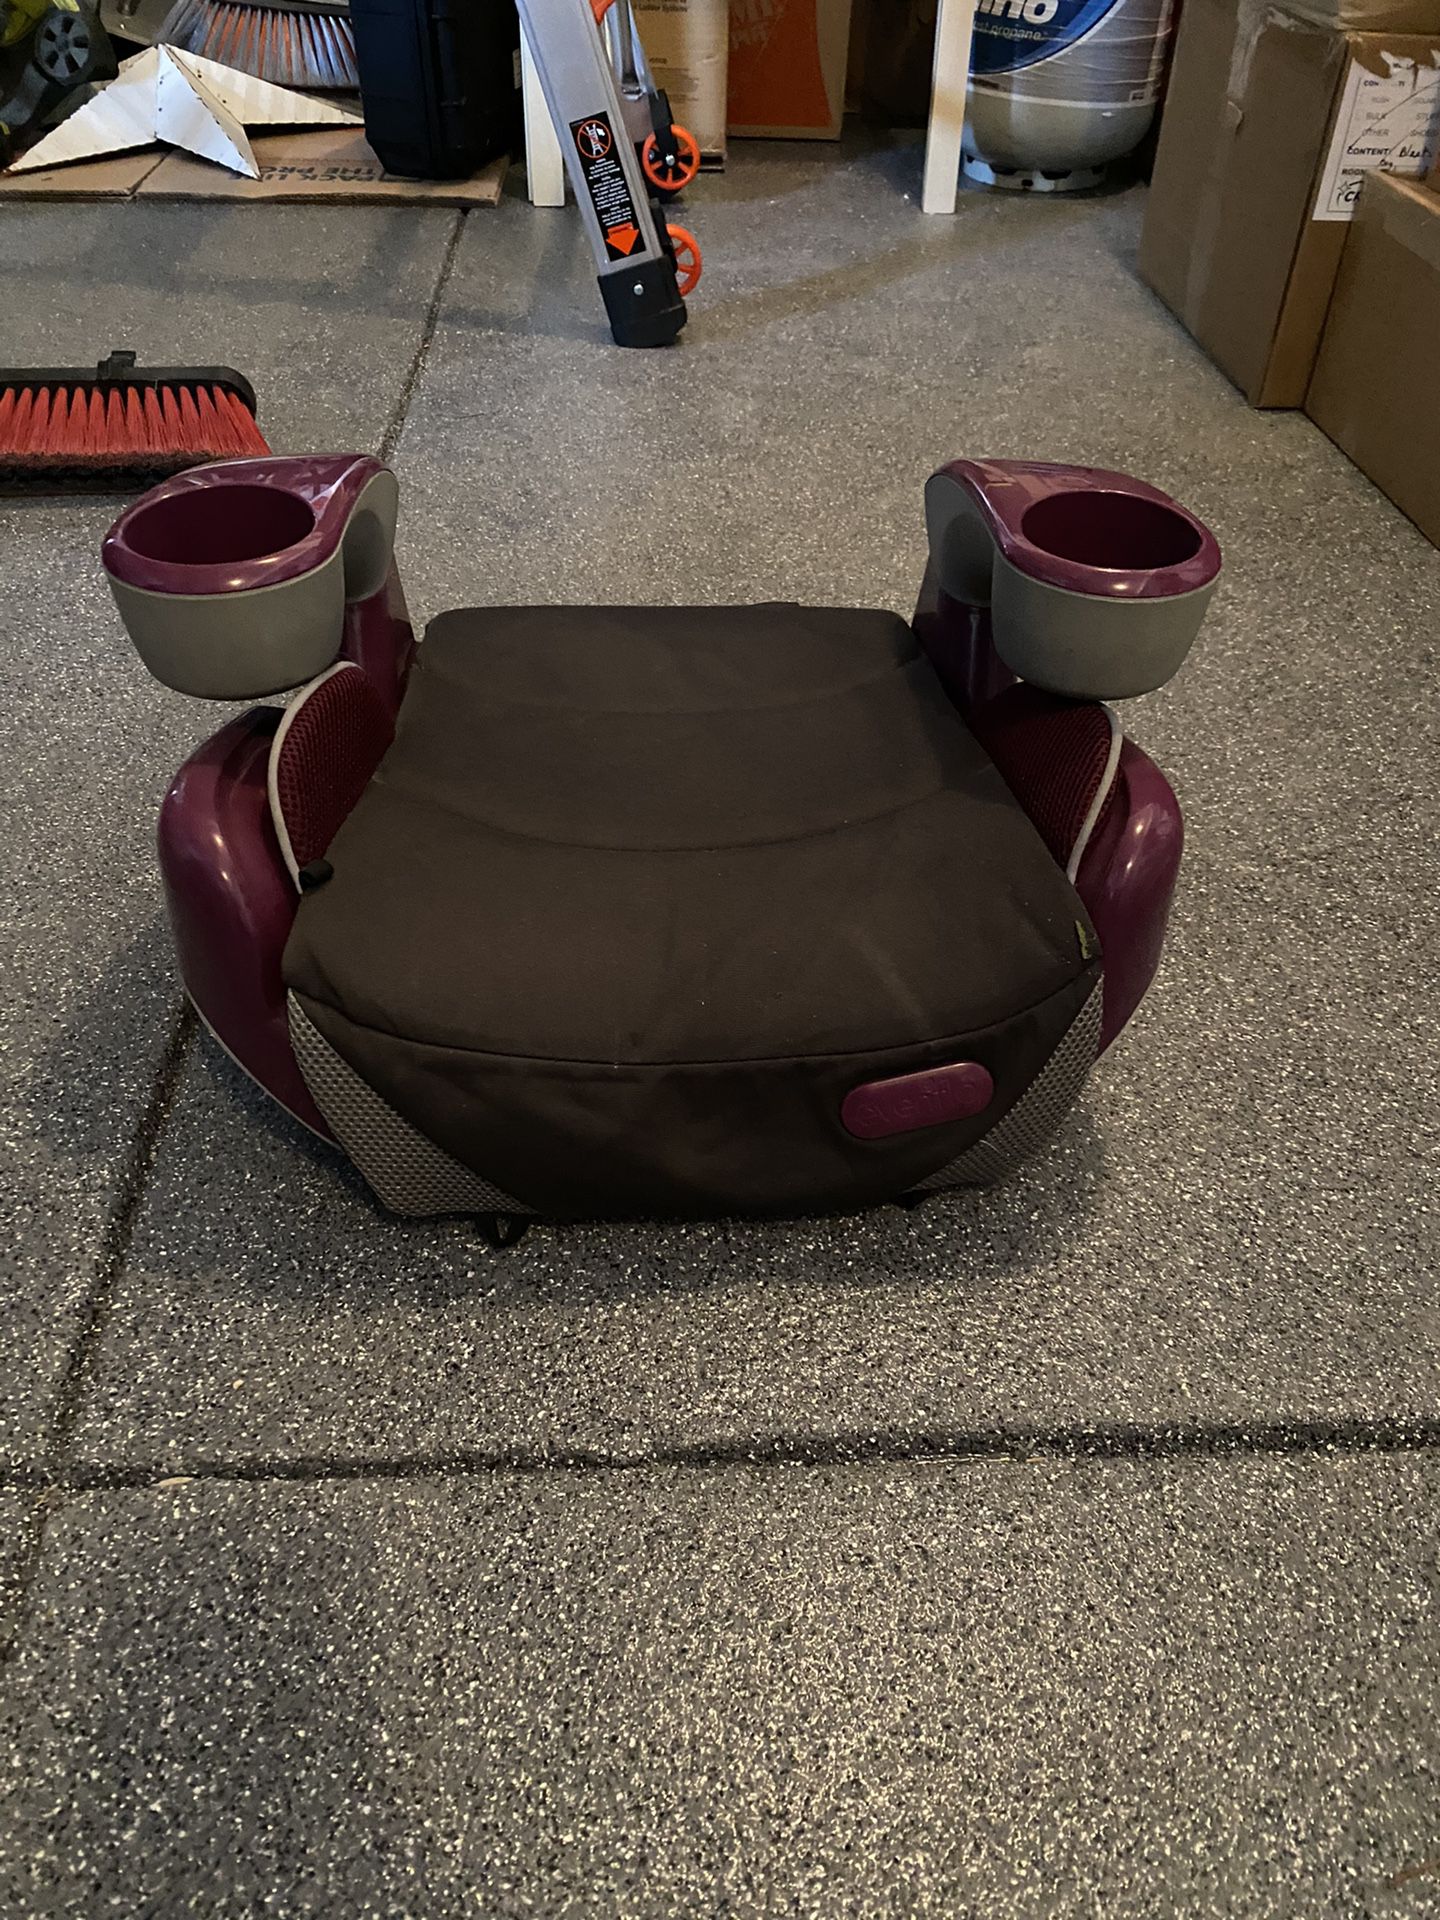 Evenflo Booster Seat-Excellent Condition